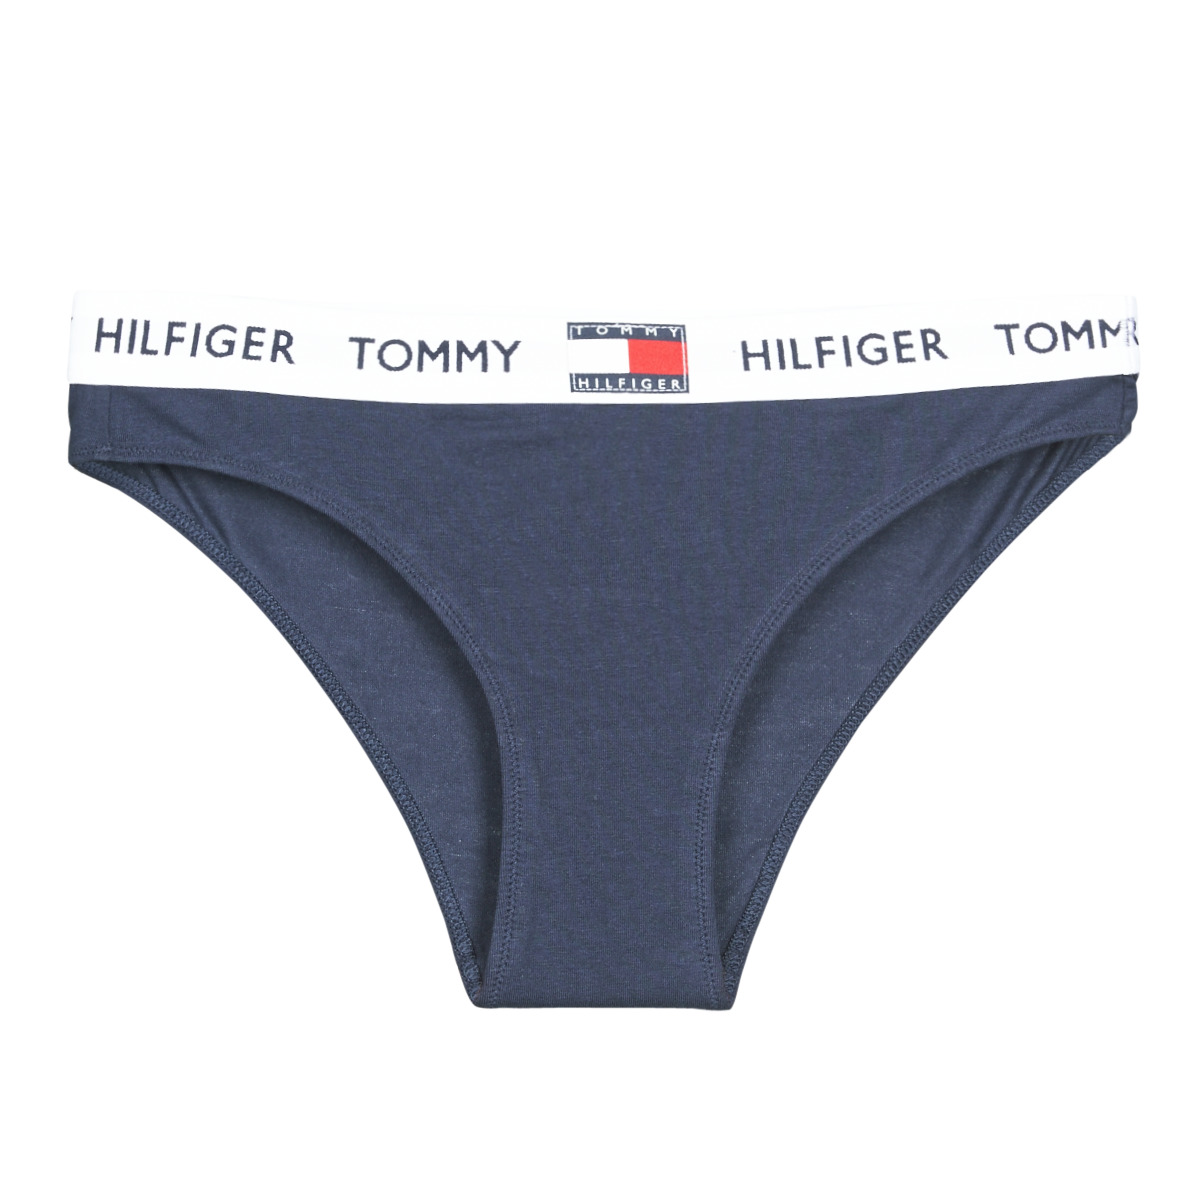 TOMMY HILFIGER FASHION Premium essential floral lace thong 3 pack